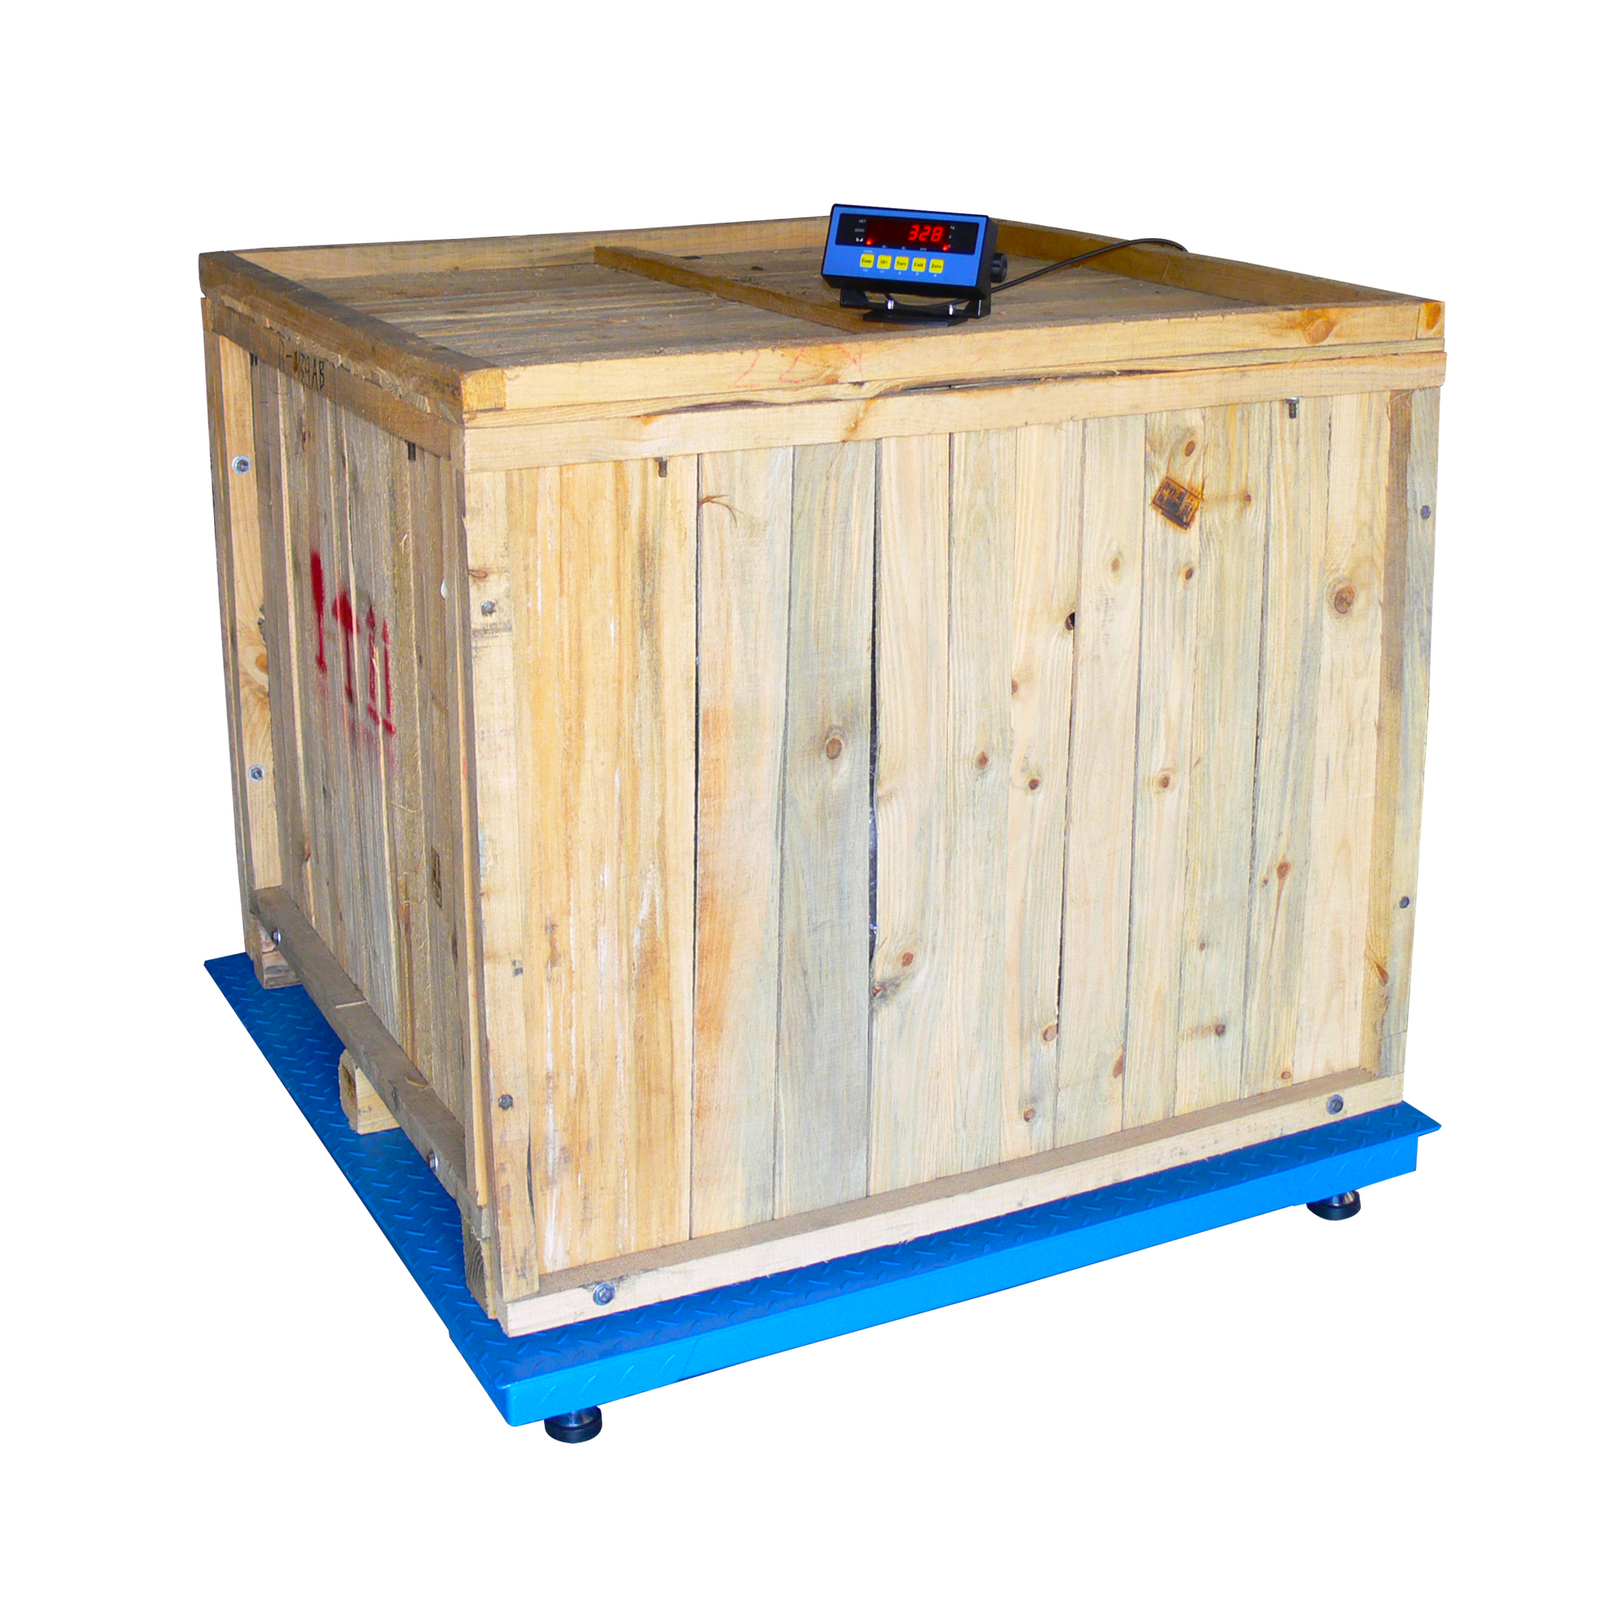 blue commercial pallet floor scale with wooden square pallet on top and digital display